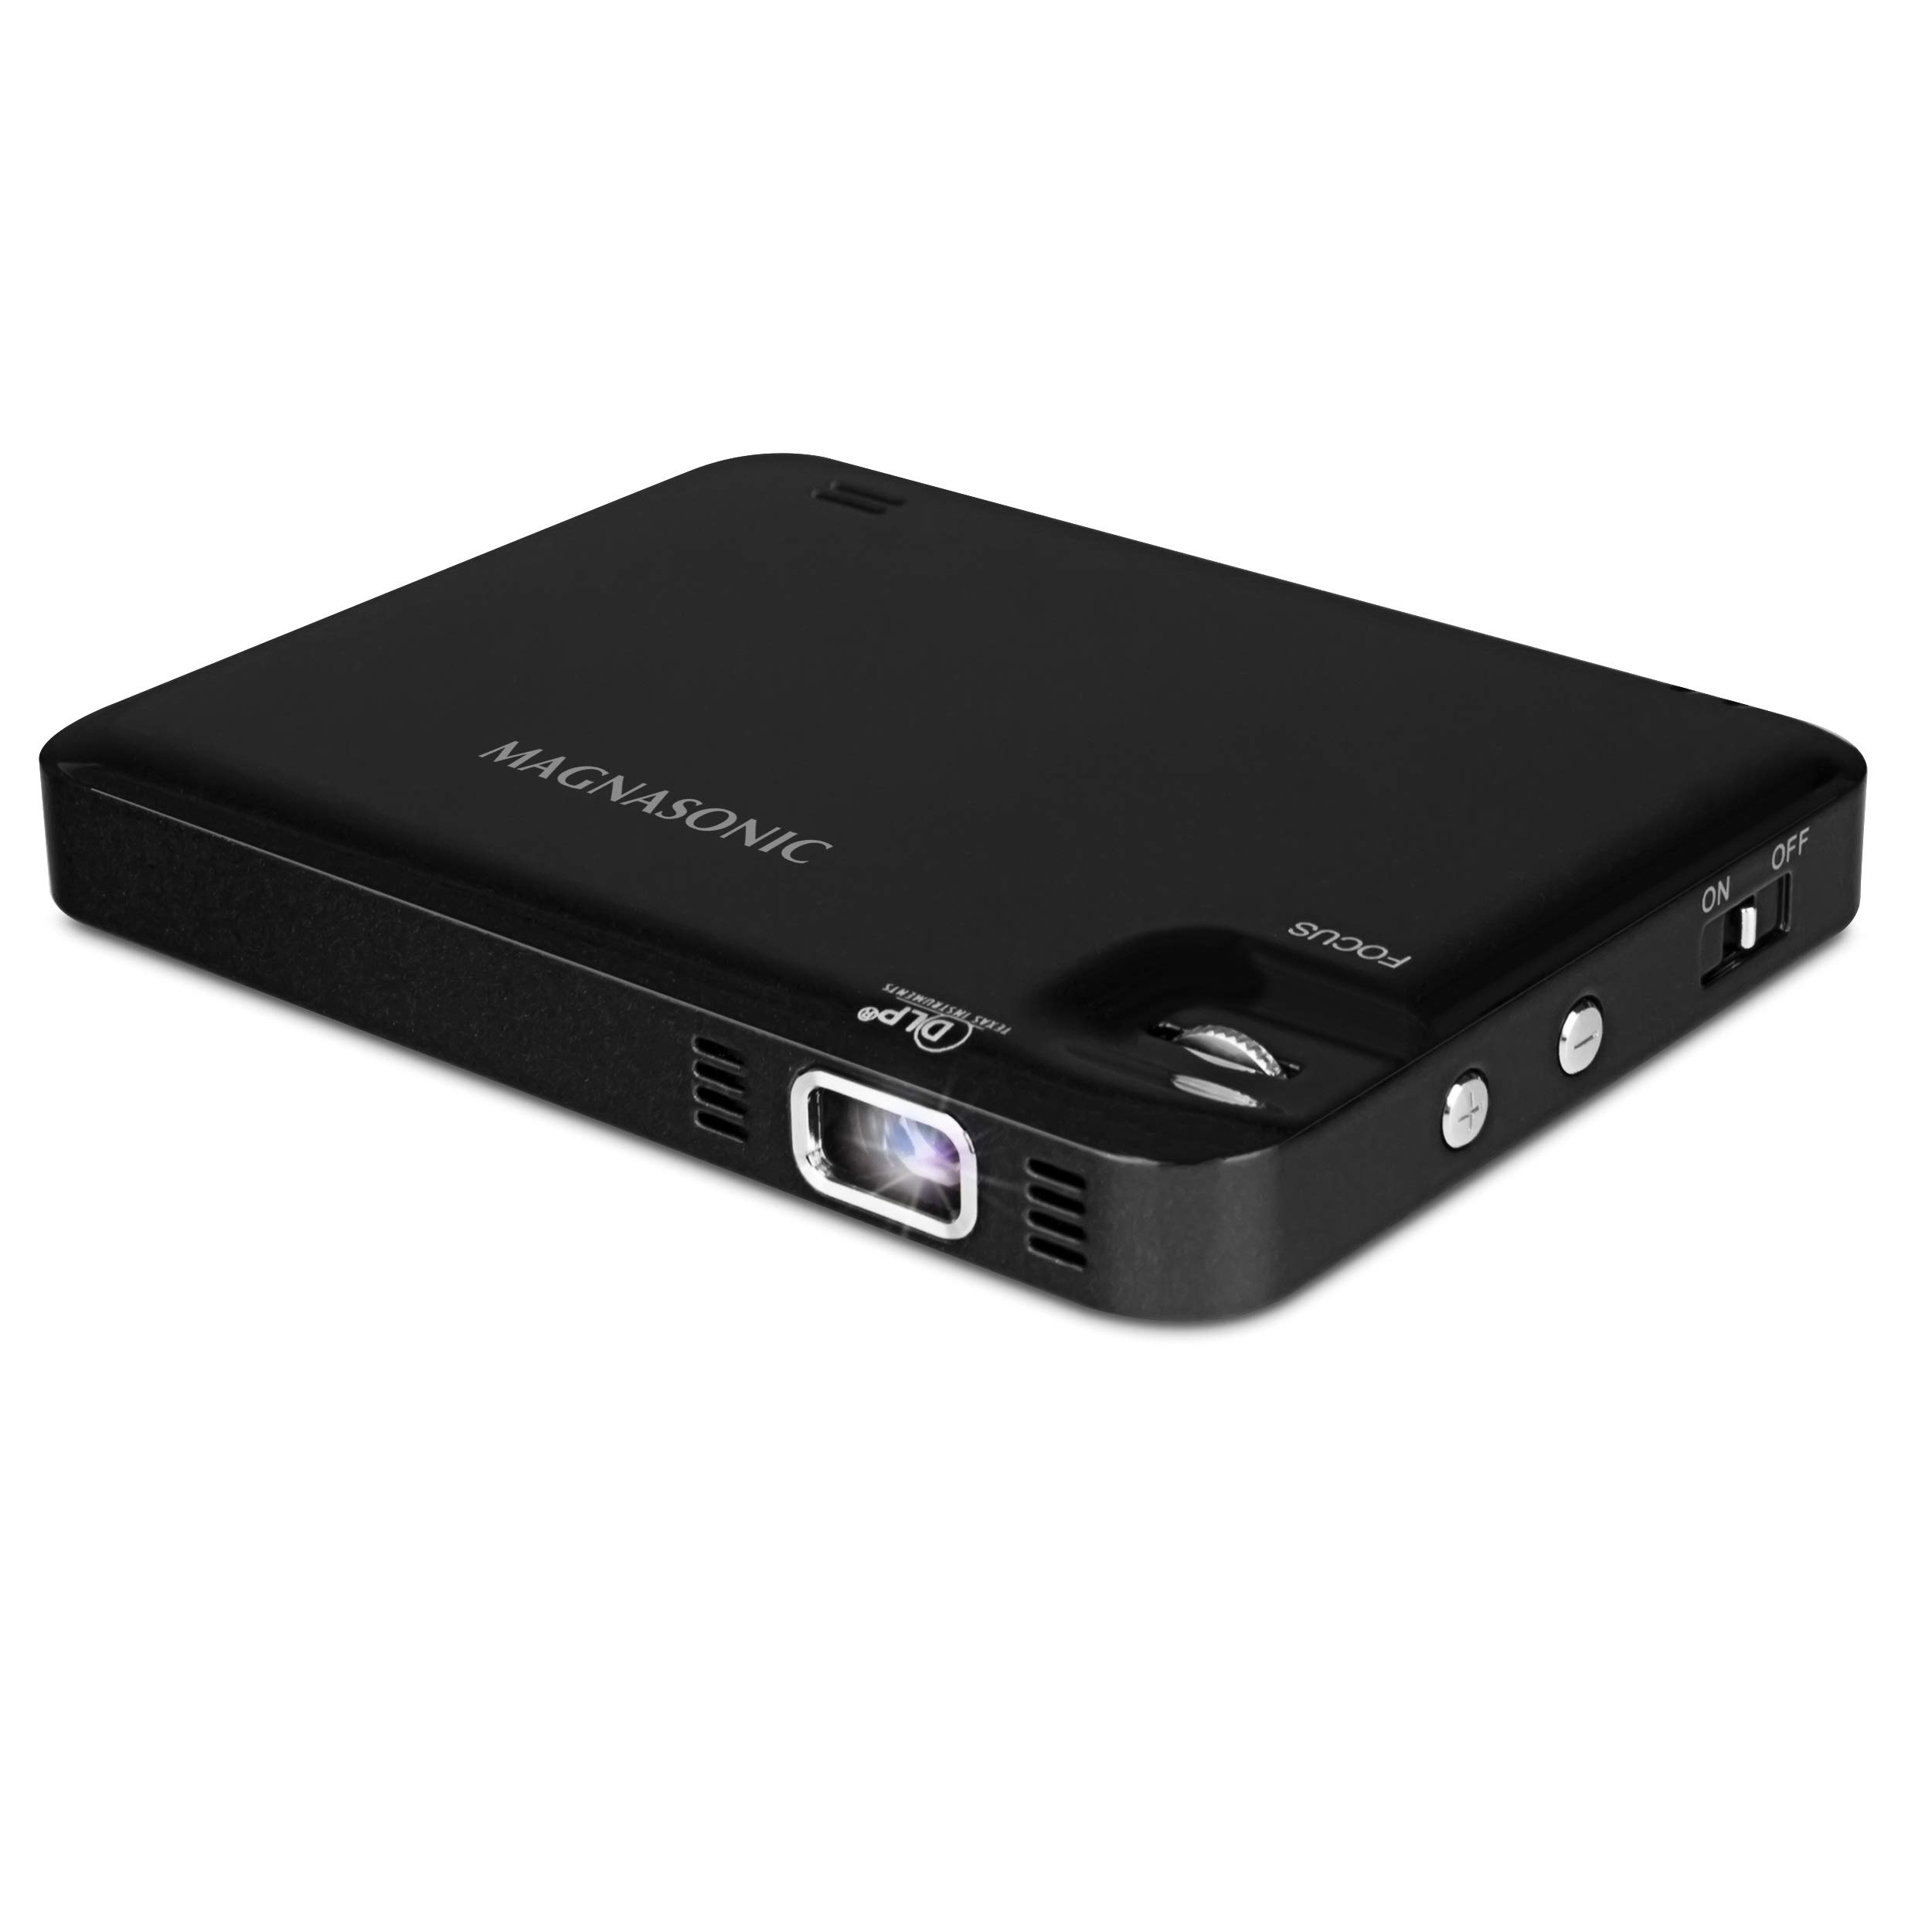 Magnasonic LED Pocket Pico Video Projector, HDMI, Rechargeable Battery, Built-in Speaker, DLP, 60